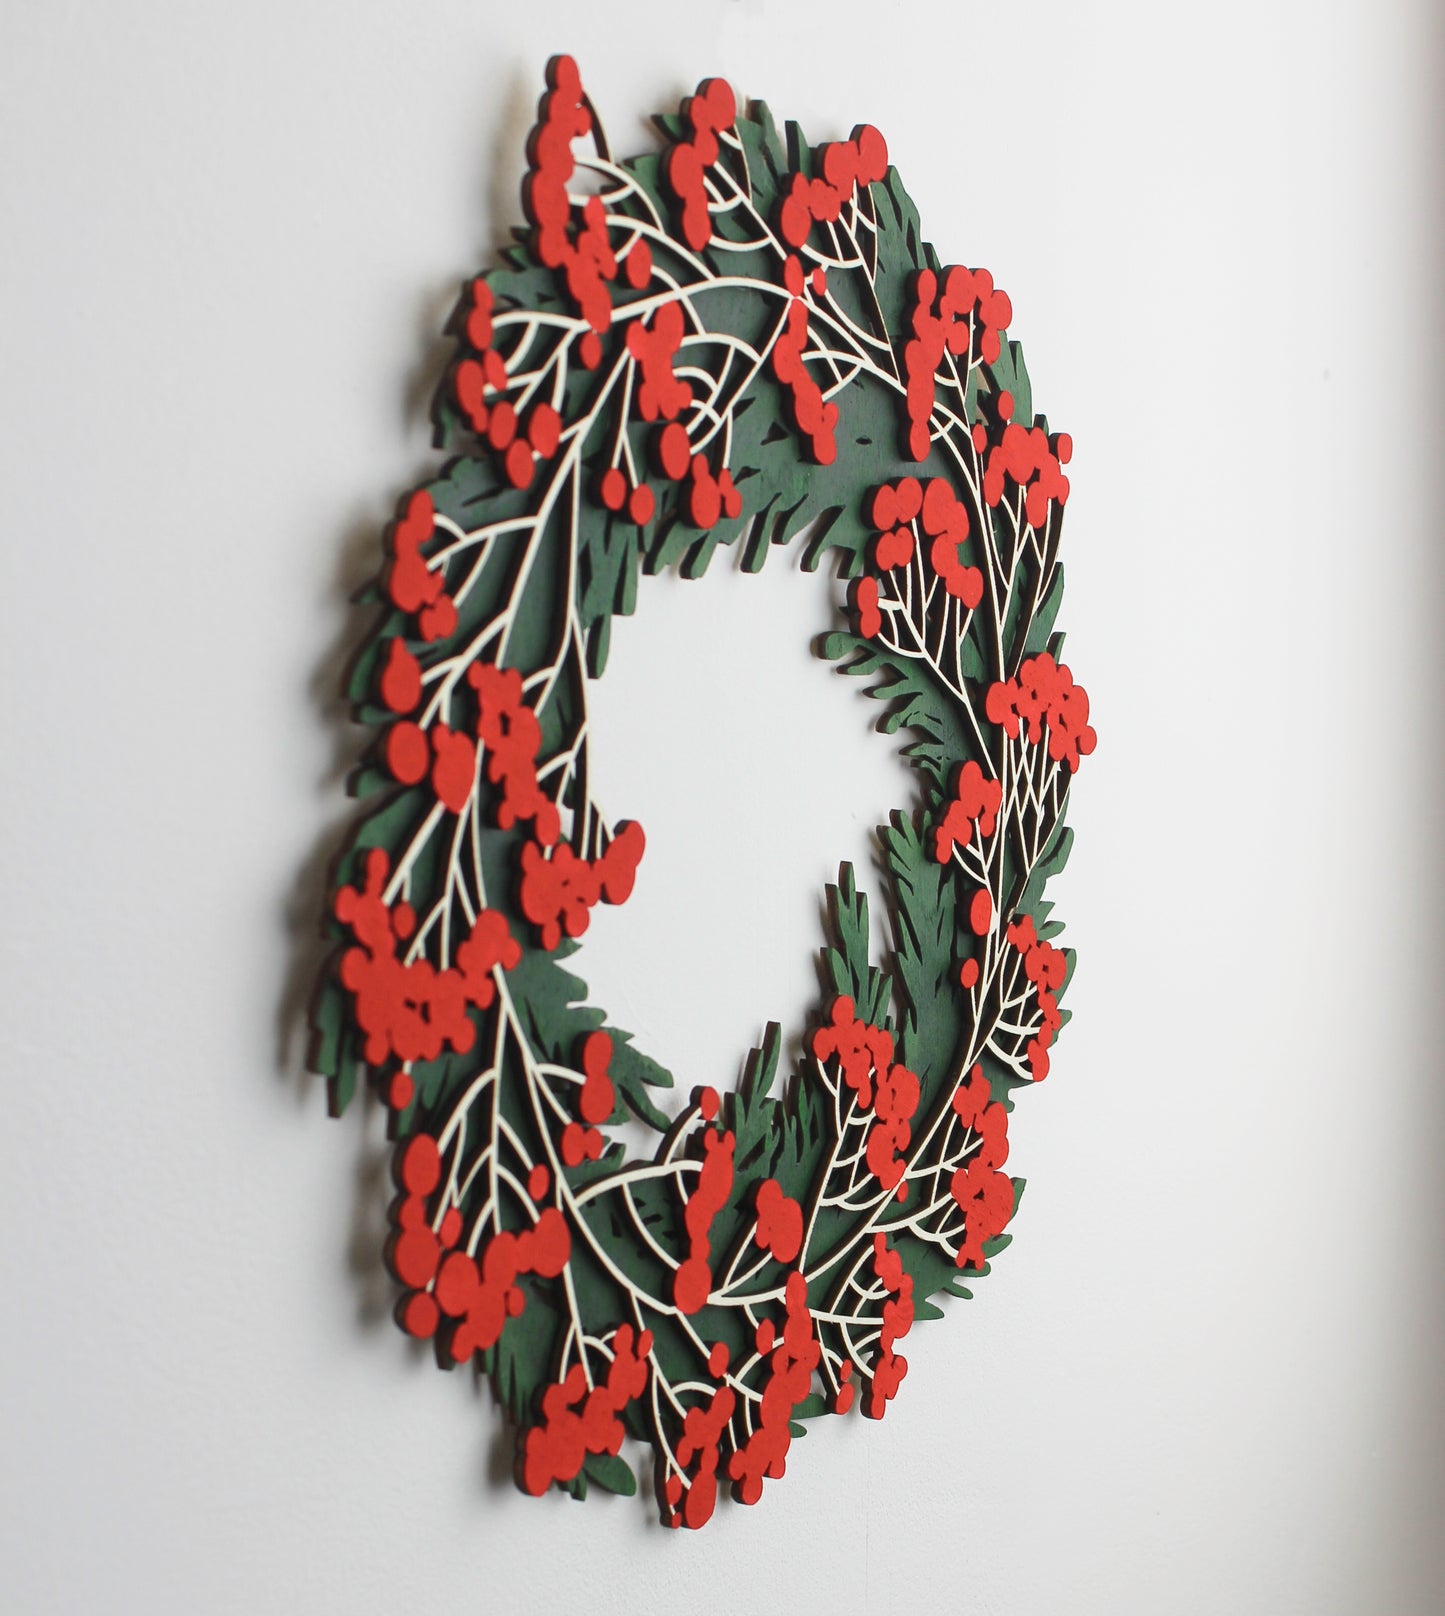 Forest Green & Red Berry Wooden Wreath - Festive Home Decor